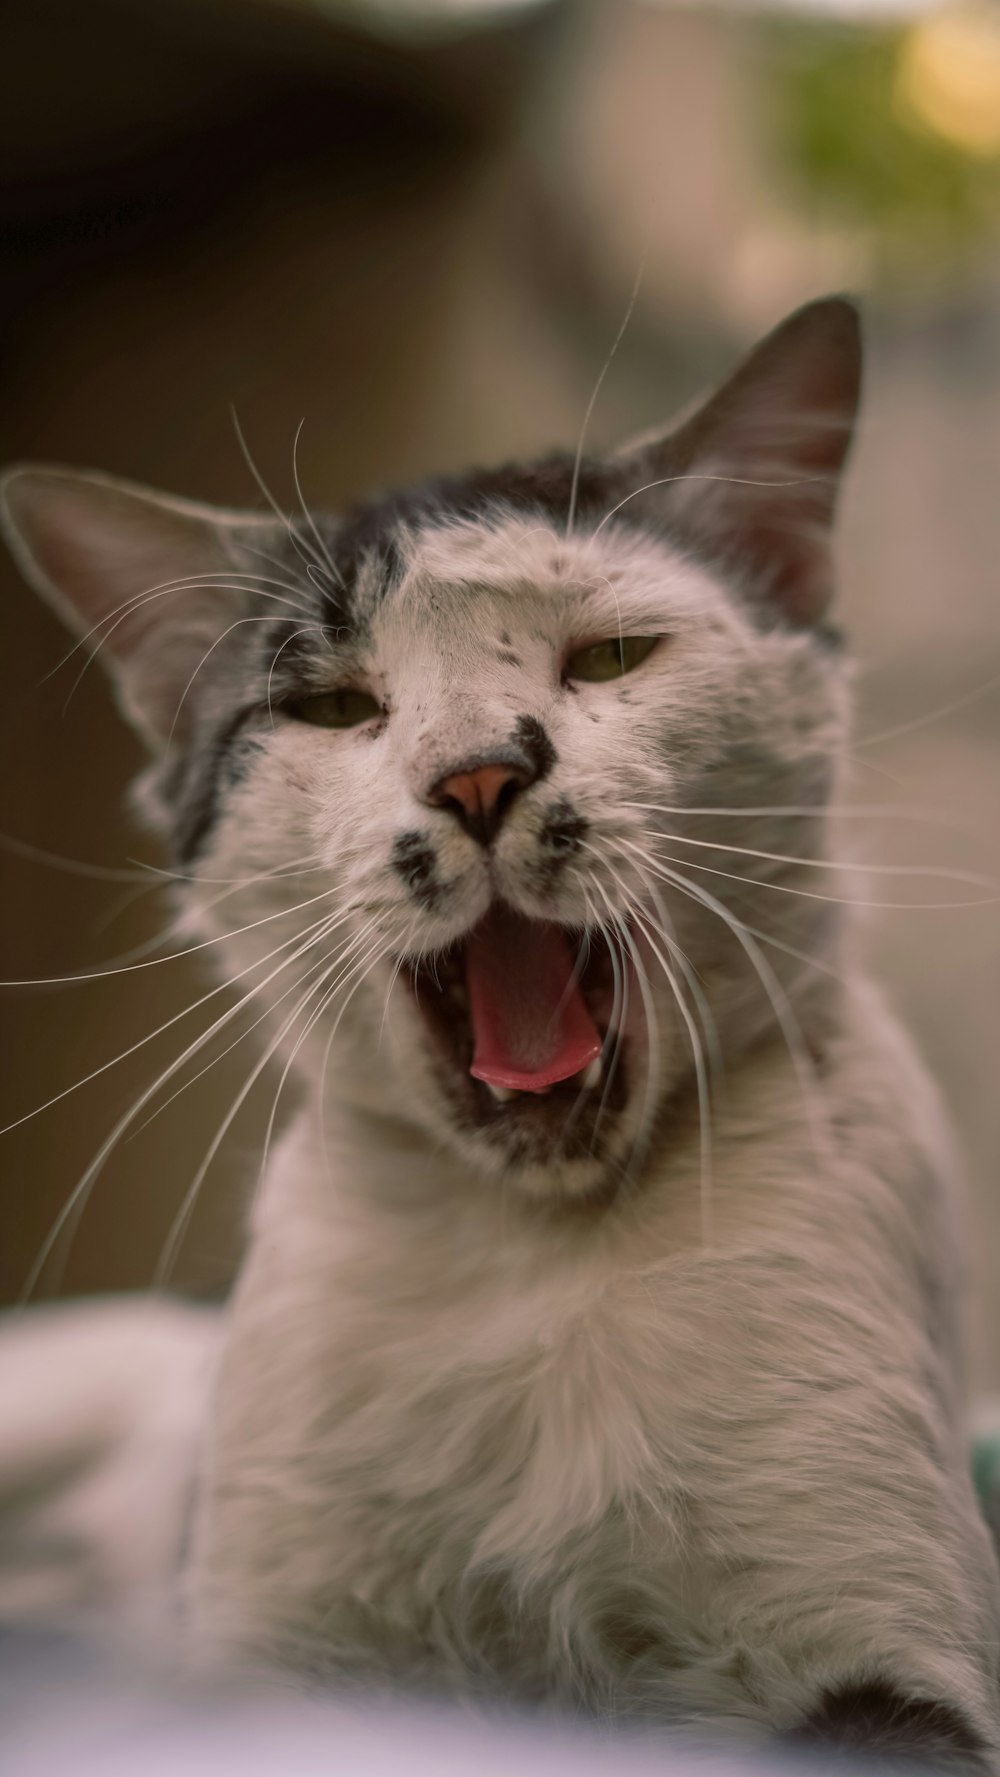 a close up of a cat yawning with its mouth open